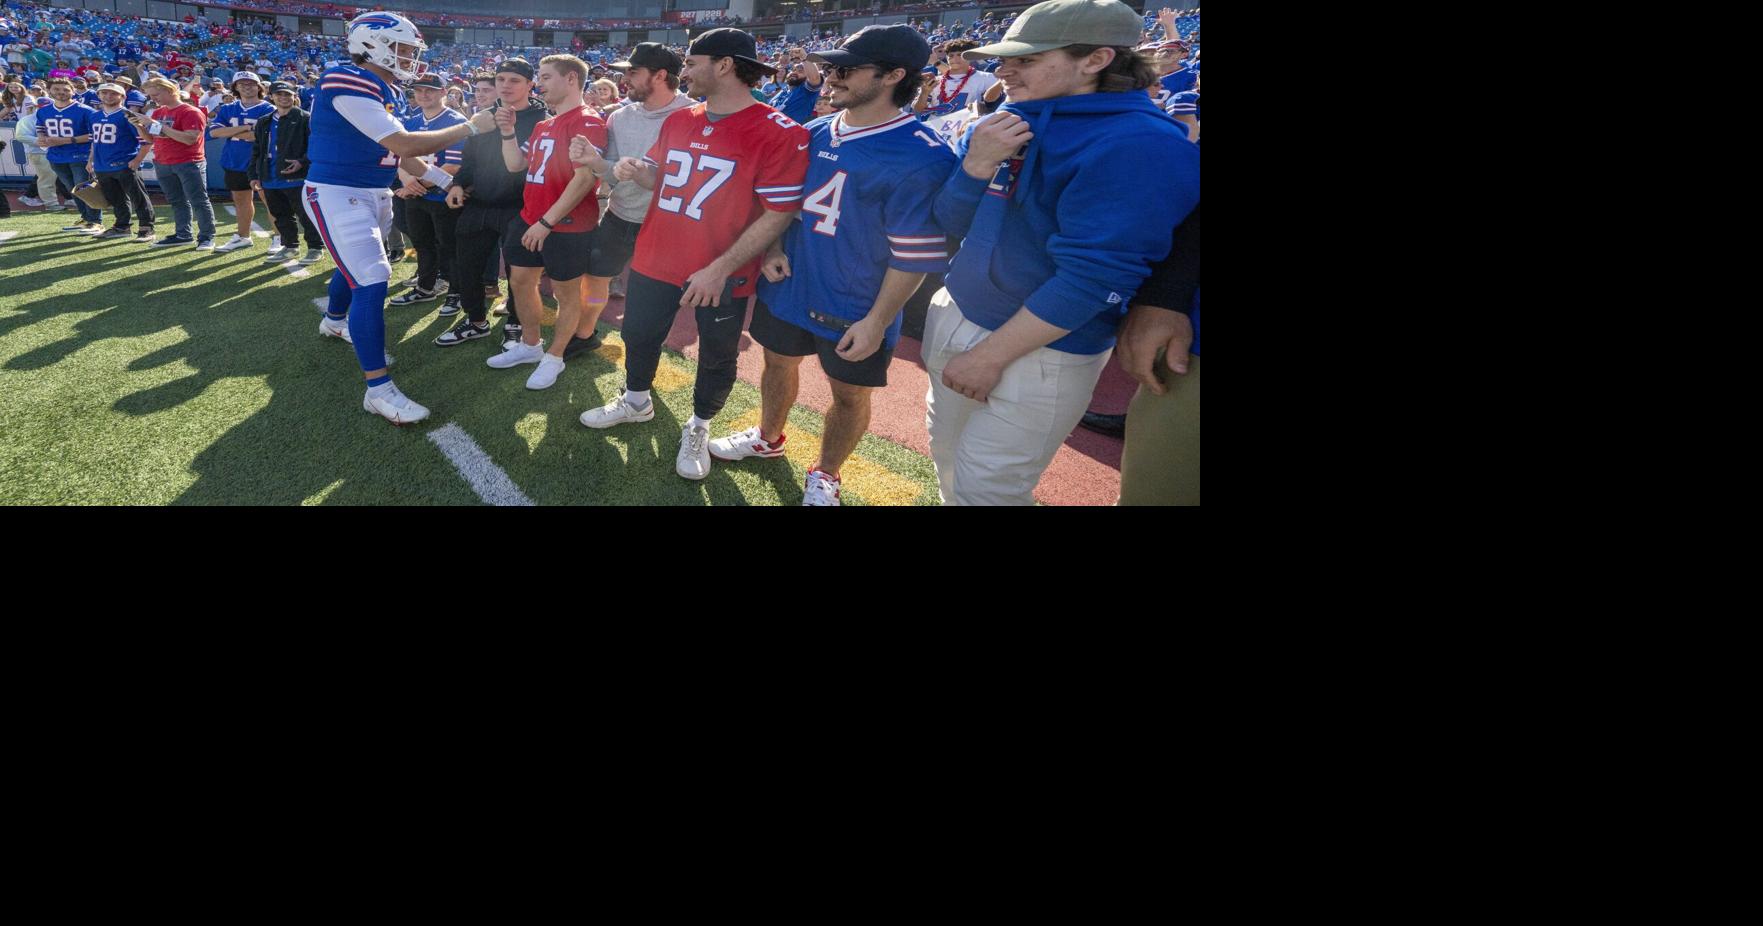 Buffalo Bills players attend Sabres home opener on Thursday